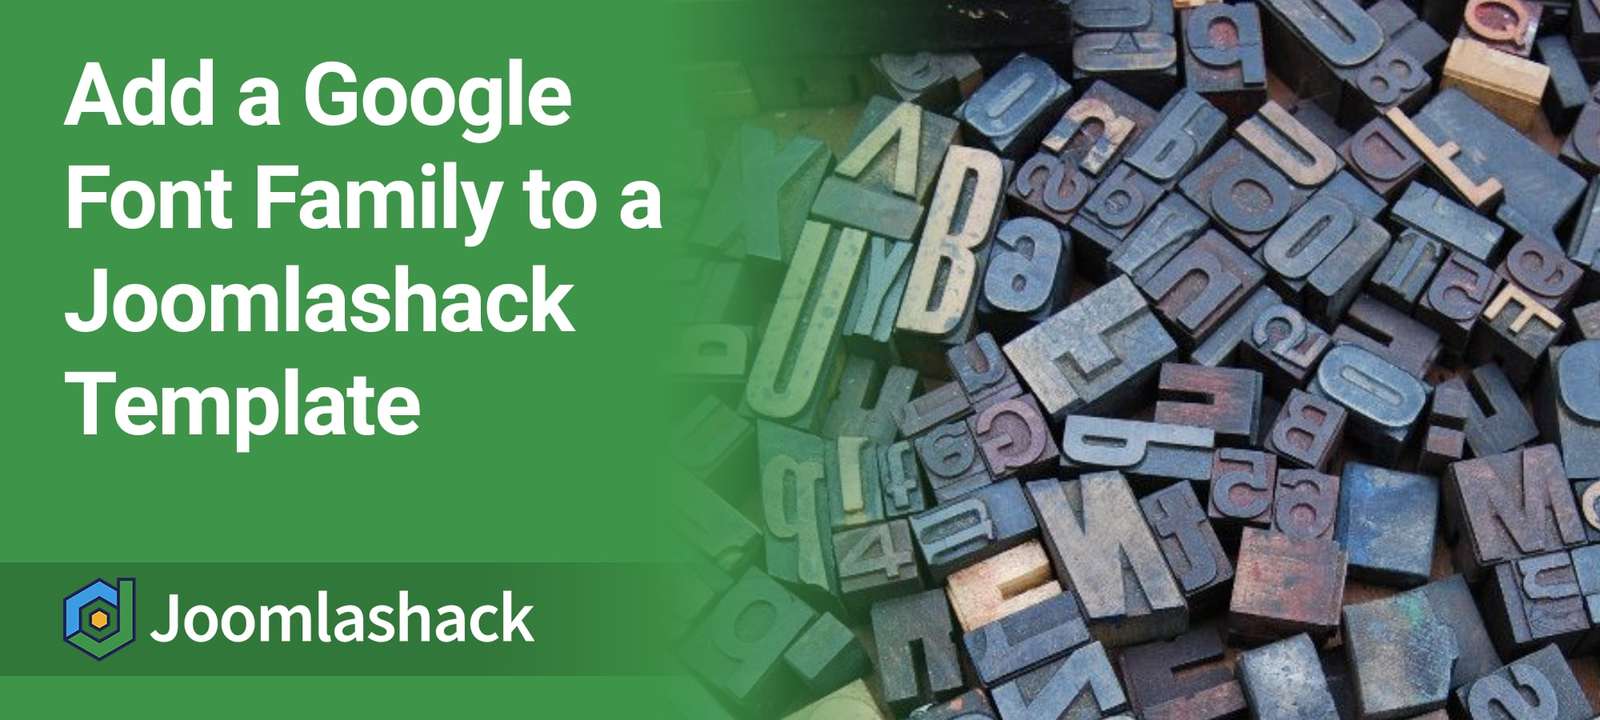 How to Add a Google Font Family to a Joomlashack Template